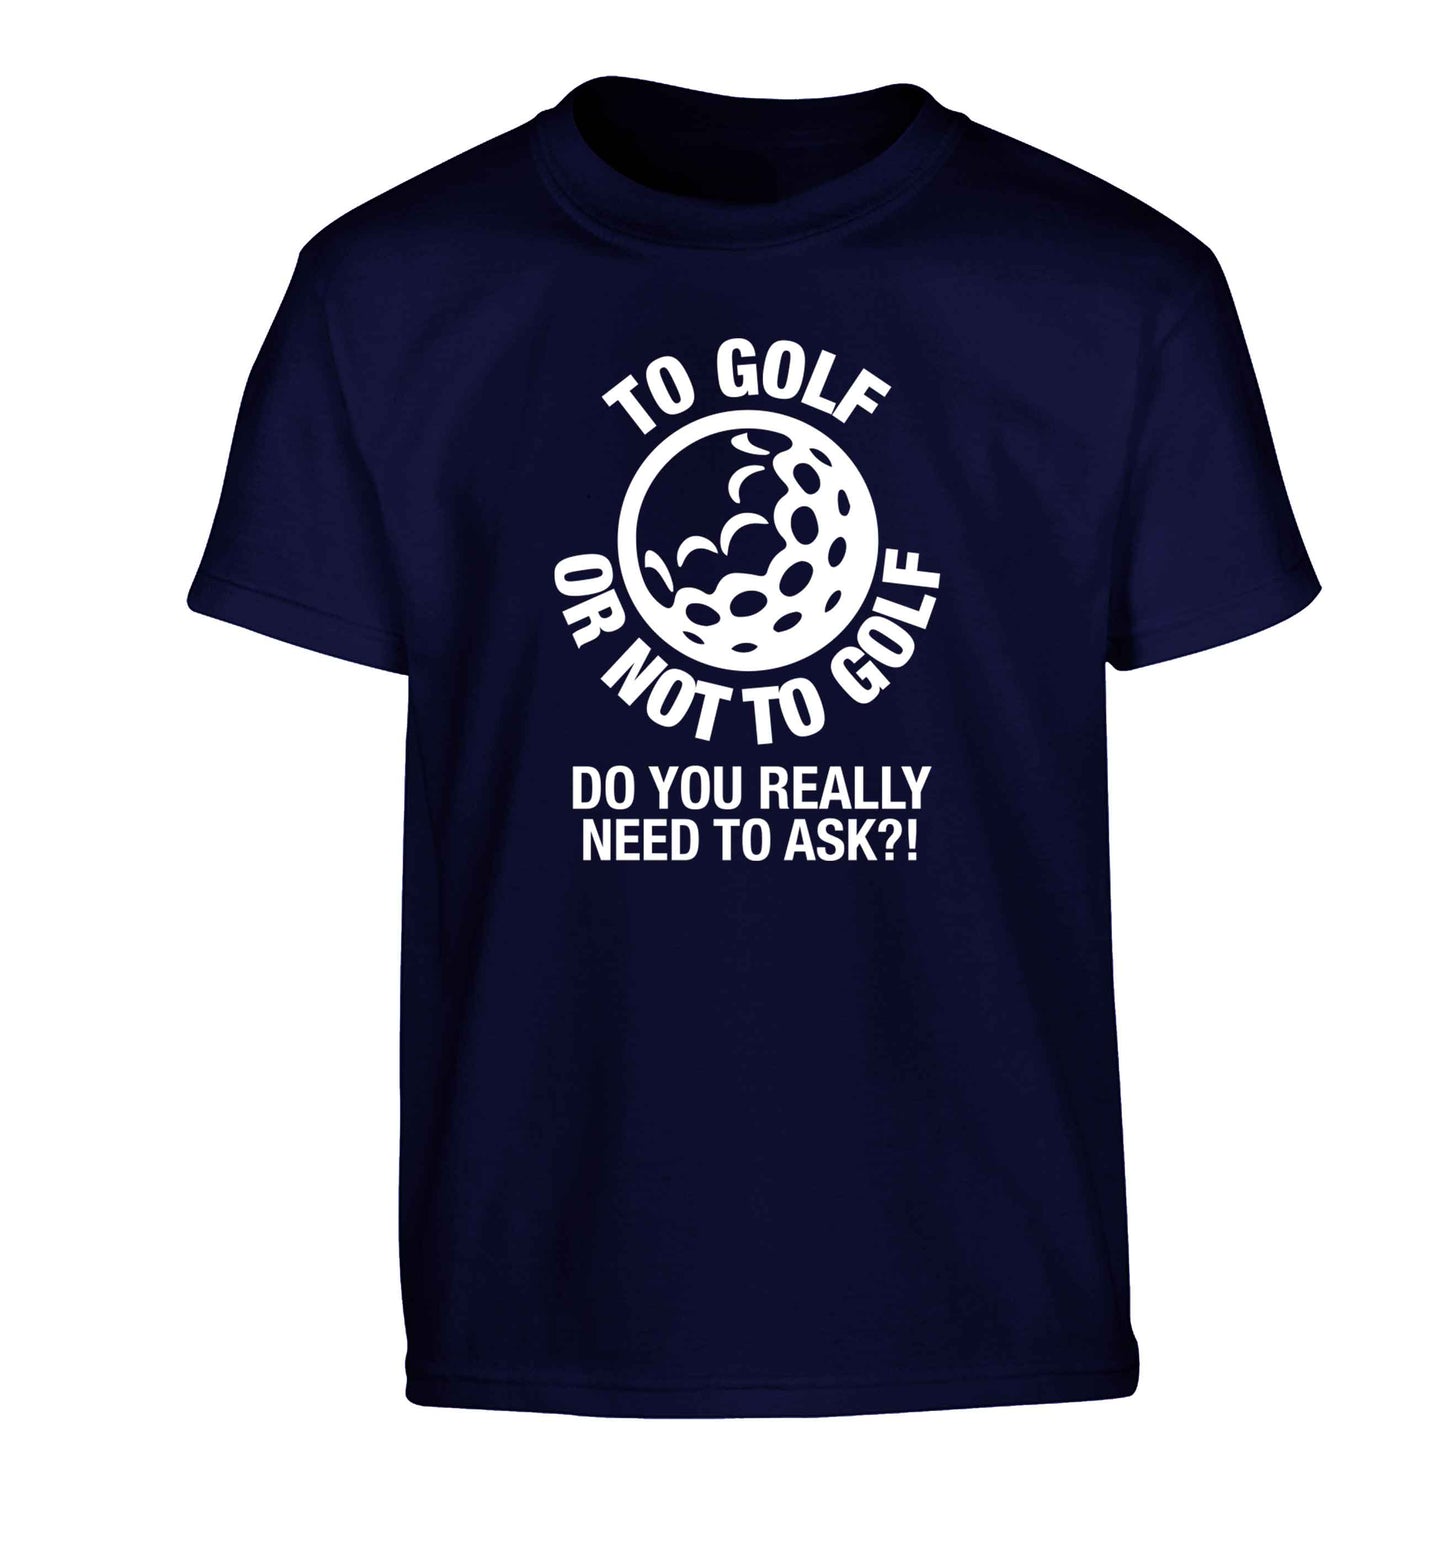 To golf or not to golf Do you really need to ask?! Children's navy Tshirt 12-13 Years